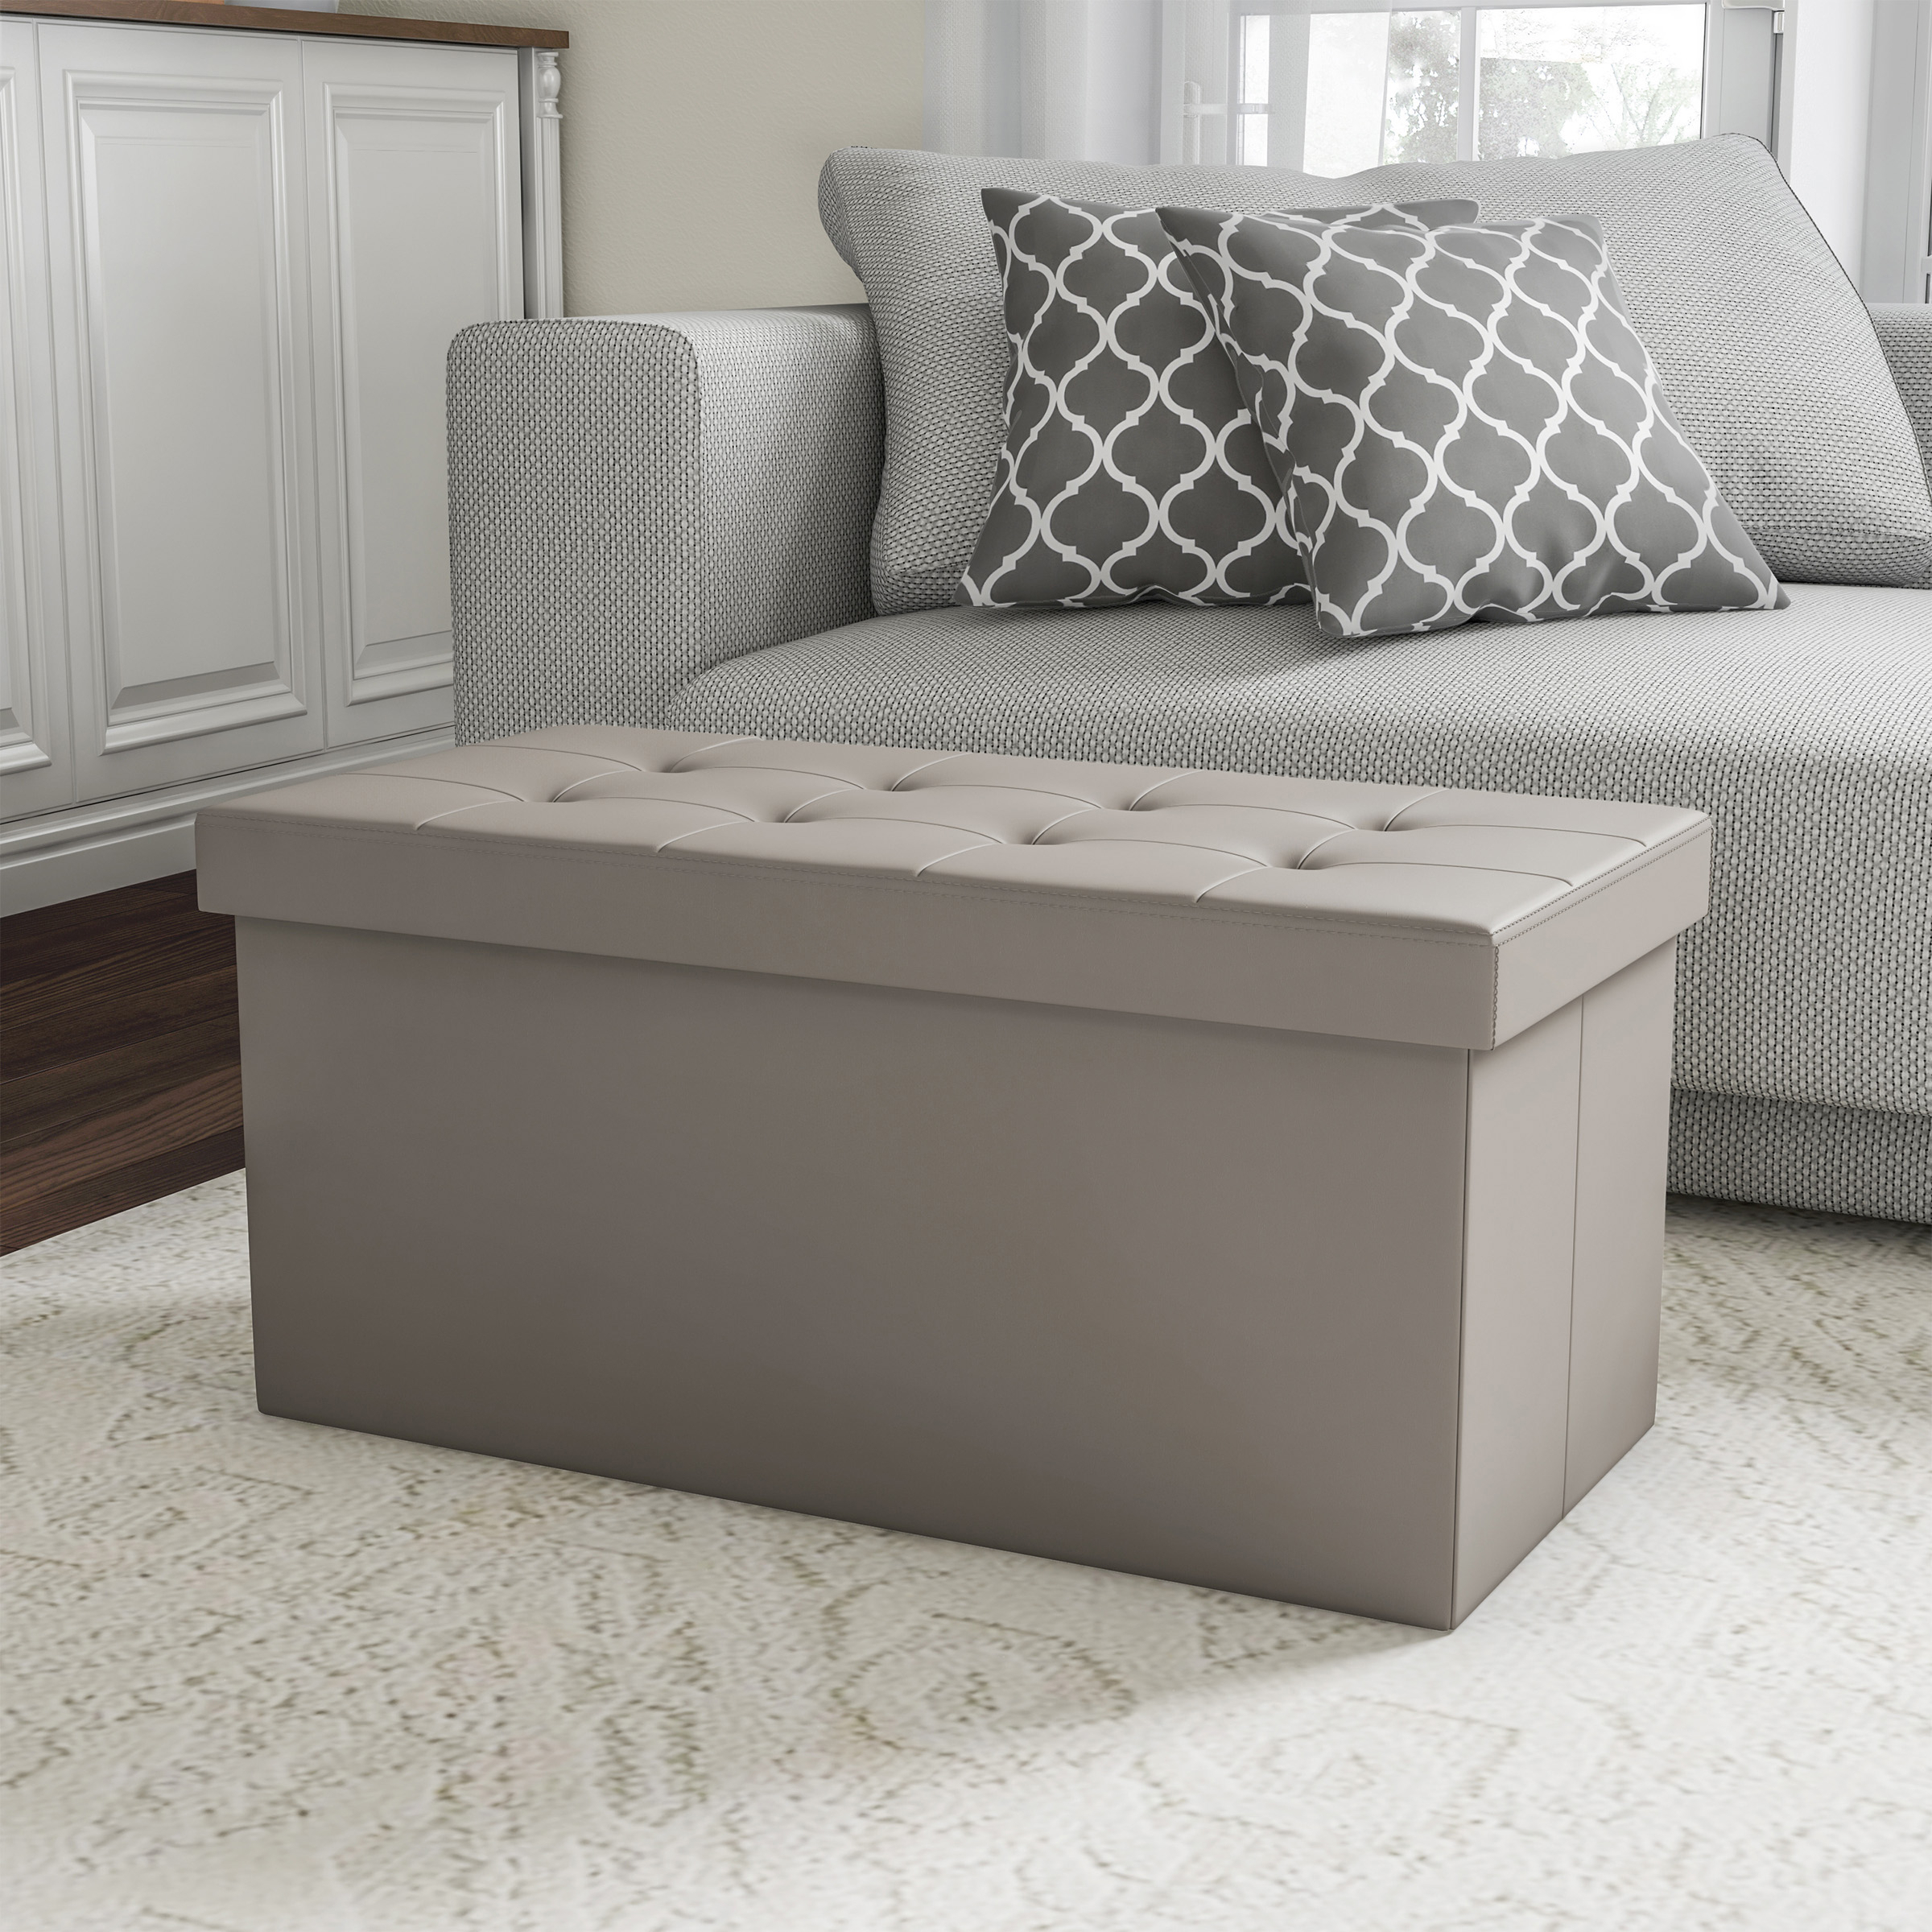 Folding Storage Bench Ottoman Faux Gray Leather- Foam Padded Lid-Removable Bin-Organizer For Home, Bedroom